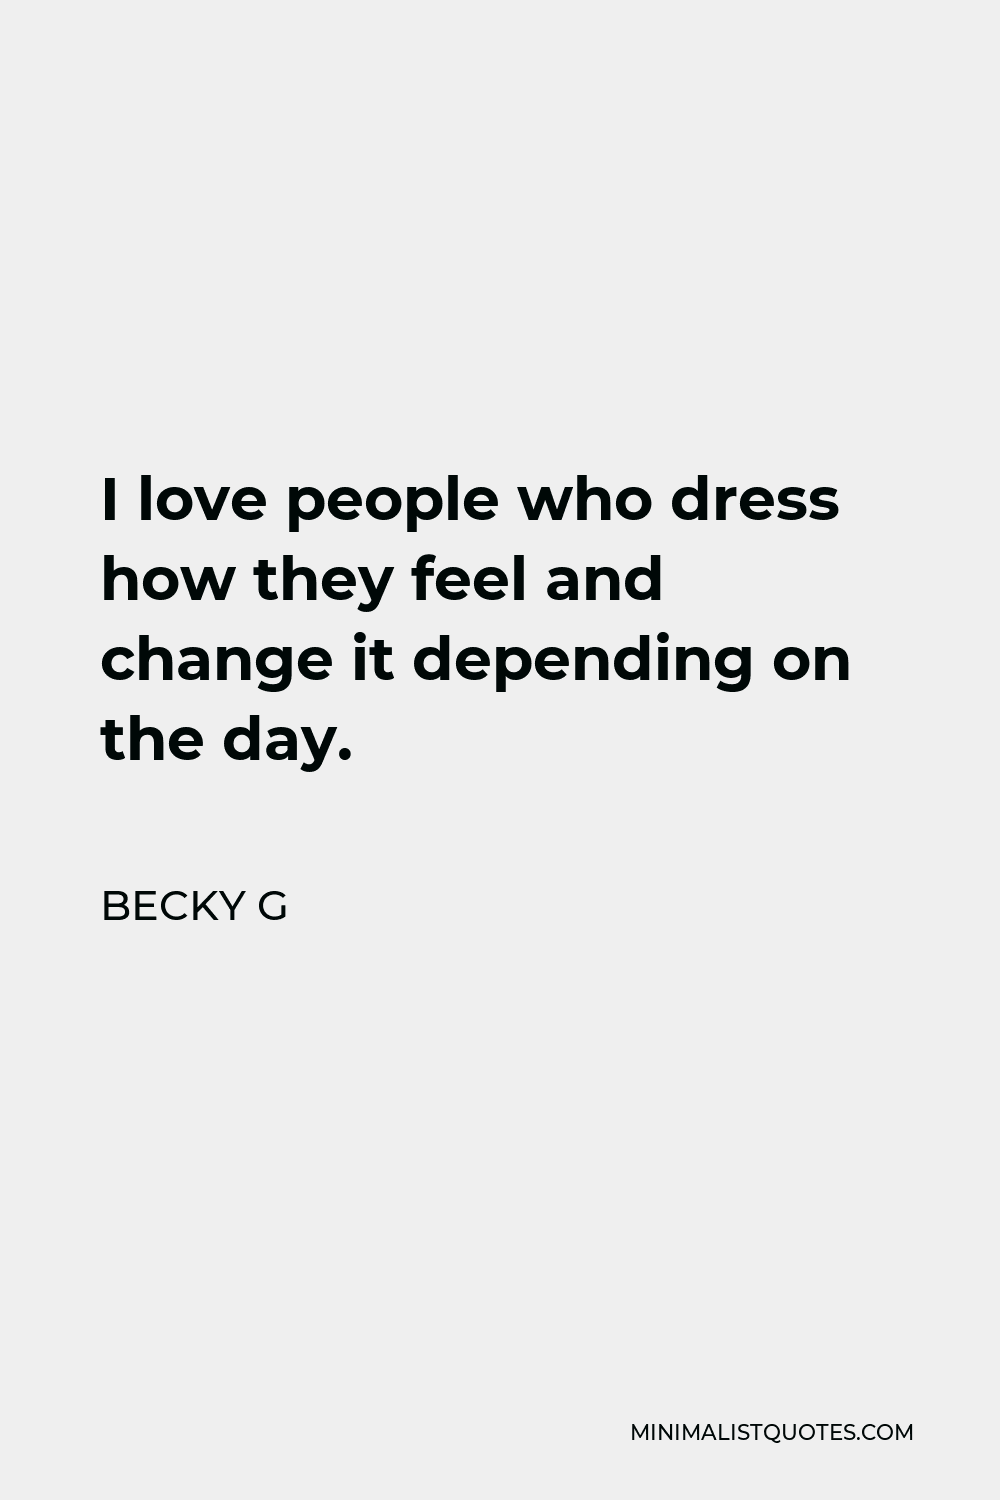 Becky G Quote - I love people who dress how they feel and change it depending on the day.